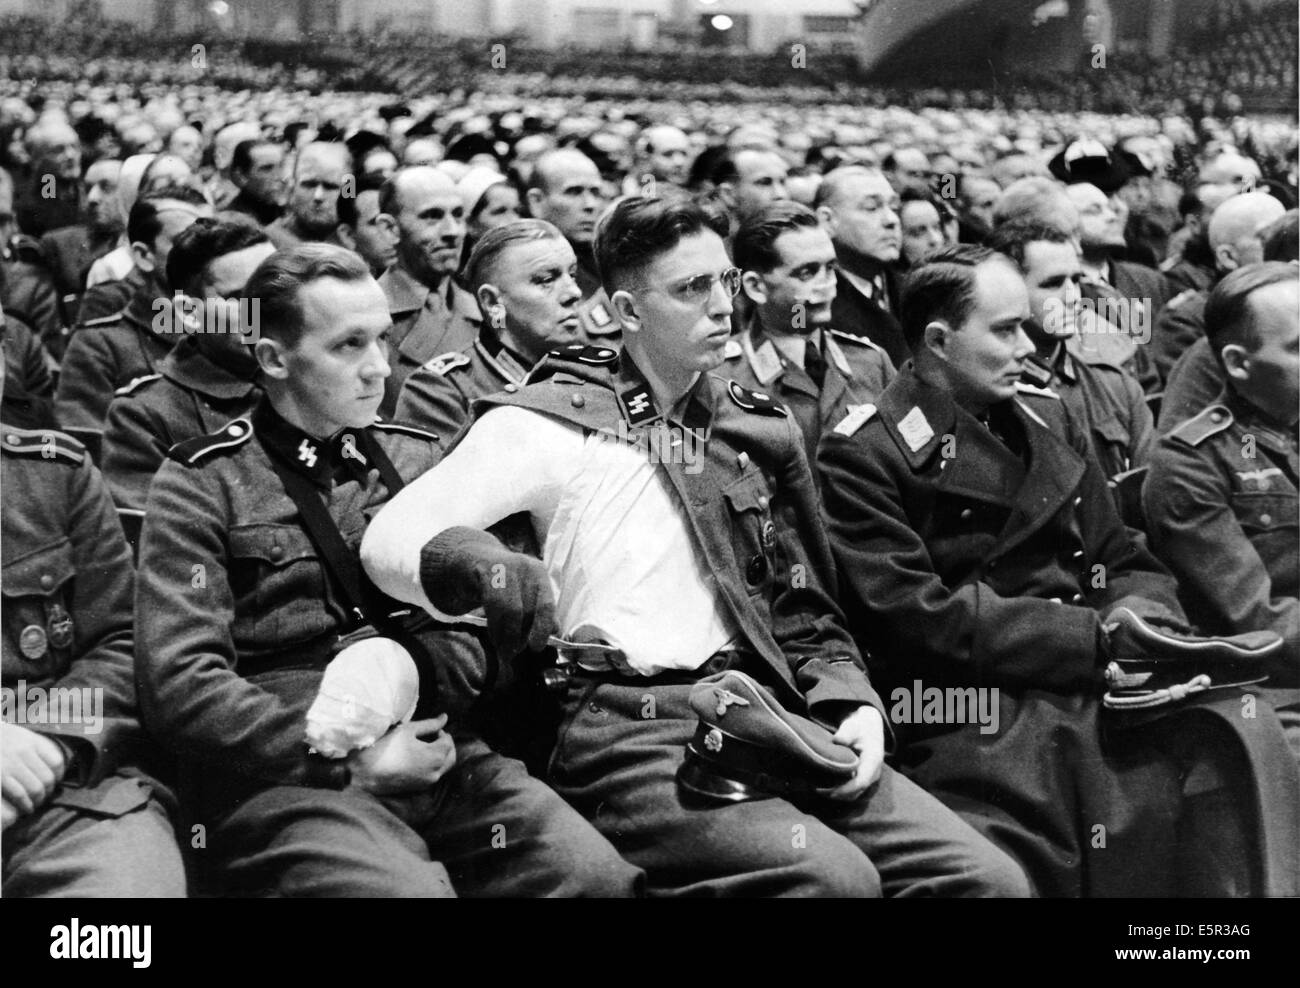 A large group of people listen to the speech by Propaganda Minister Joseph Goebbels, who called for 'total war' at the Sportpalast in Berlin, Germany, 18 February 1943. The original Nazi propaganda text on the back of the picture: 'Grand Sportpalast rally with Reich Minister Dr. Goebbels. In the traditional venue, the Berlin Sportpalast, a large rally was held on 02.18.1943 where Reich Minister Dr. Goebbels gave a speech. The spontaneous consent to the issues discussed by Dr. Goebbels showed the close relationship between the various groups of people from all professions and the Nazi leadershi Stock Photo